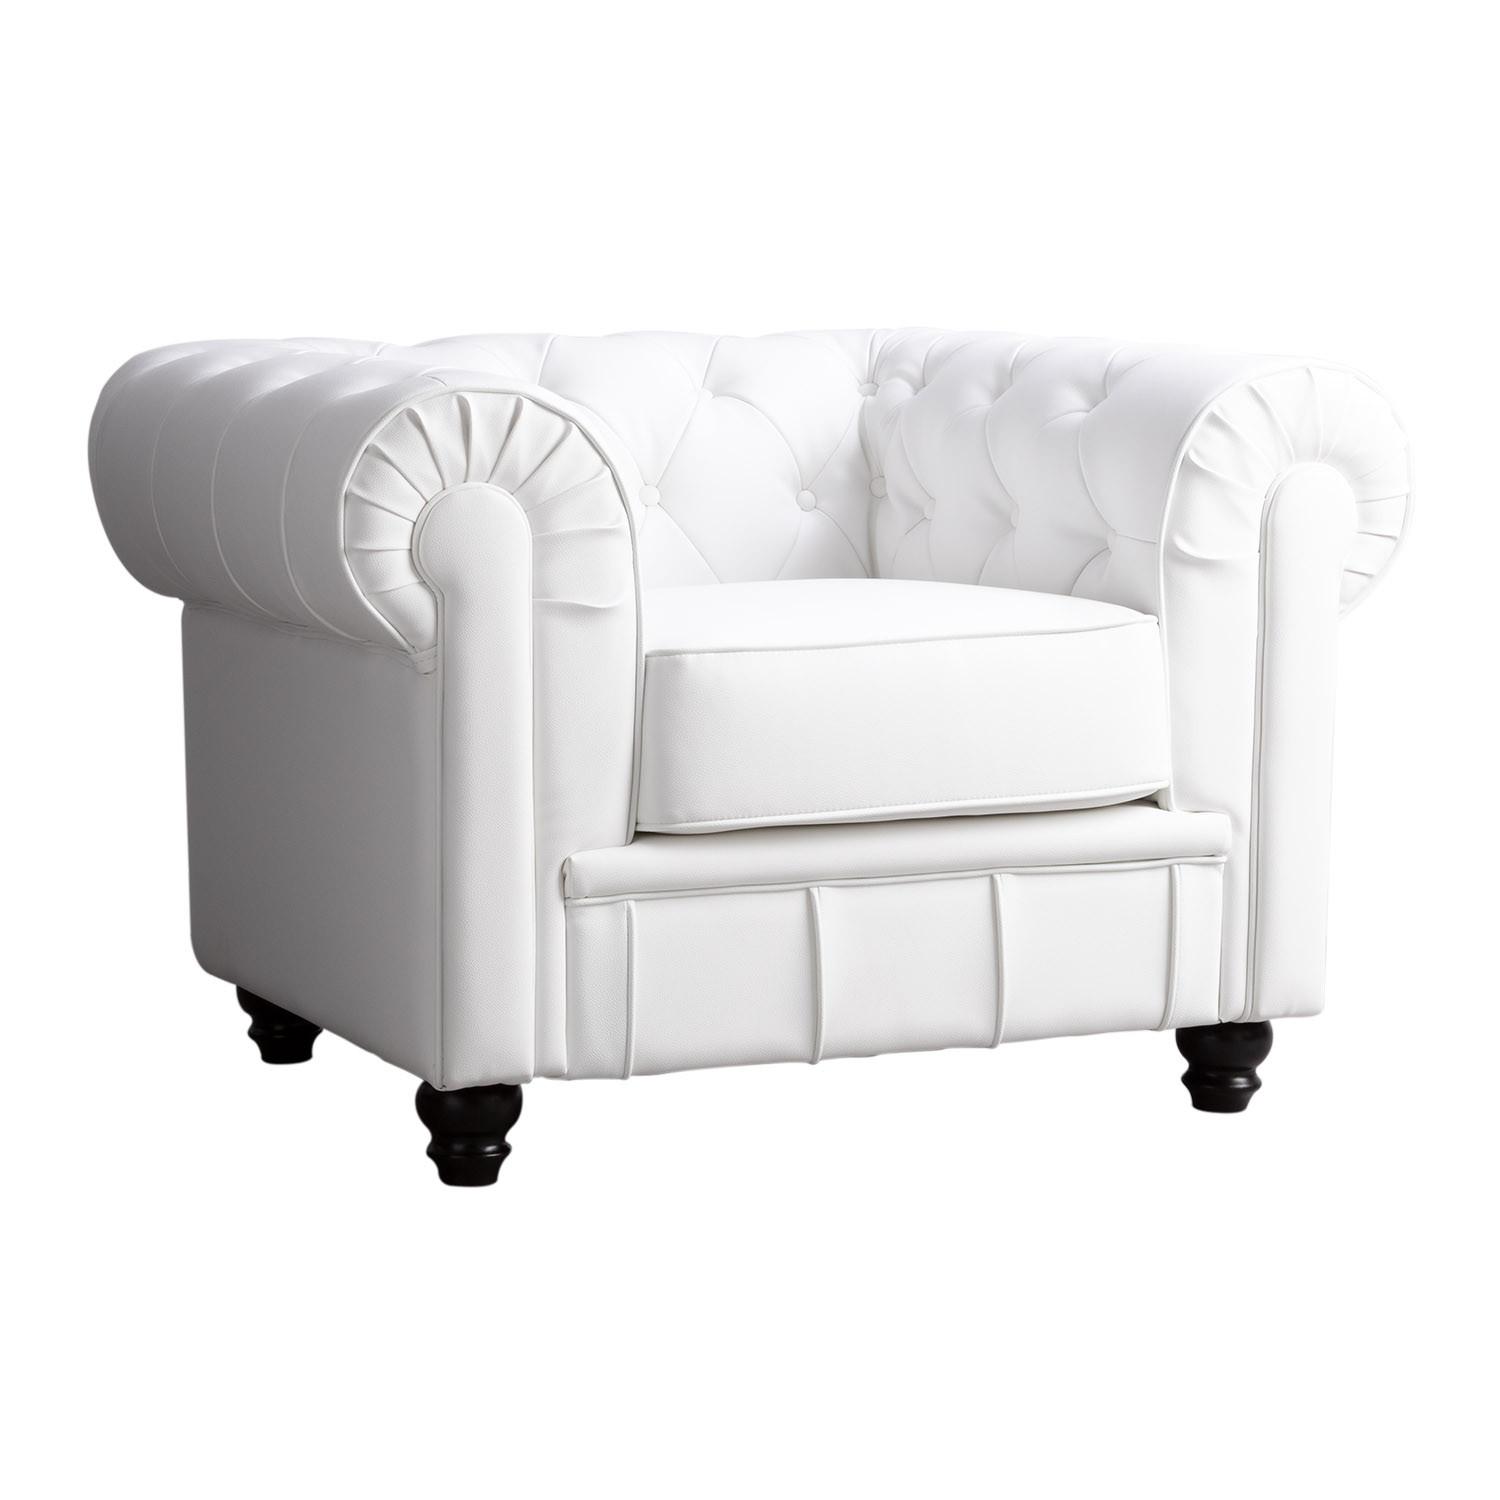 Fauteuil chester moderne blanc